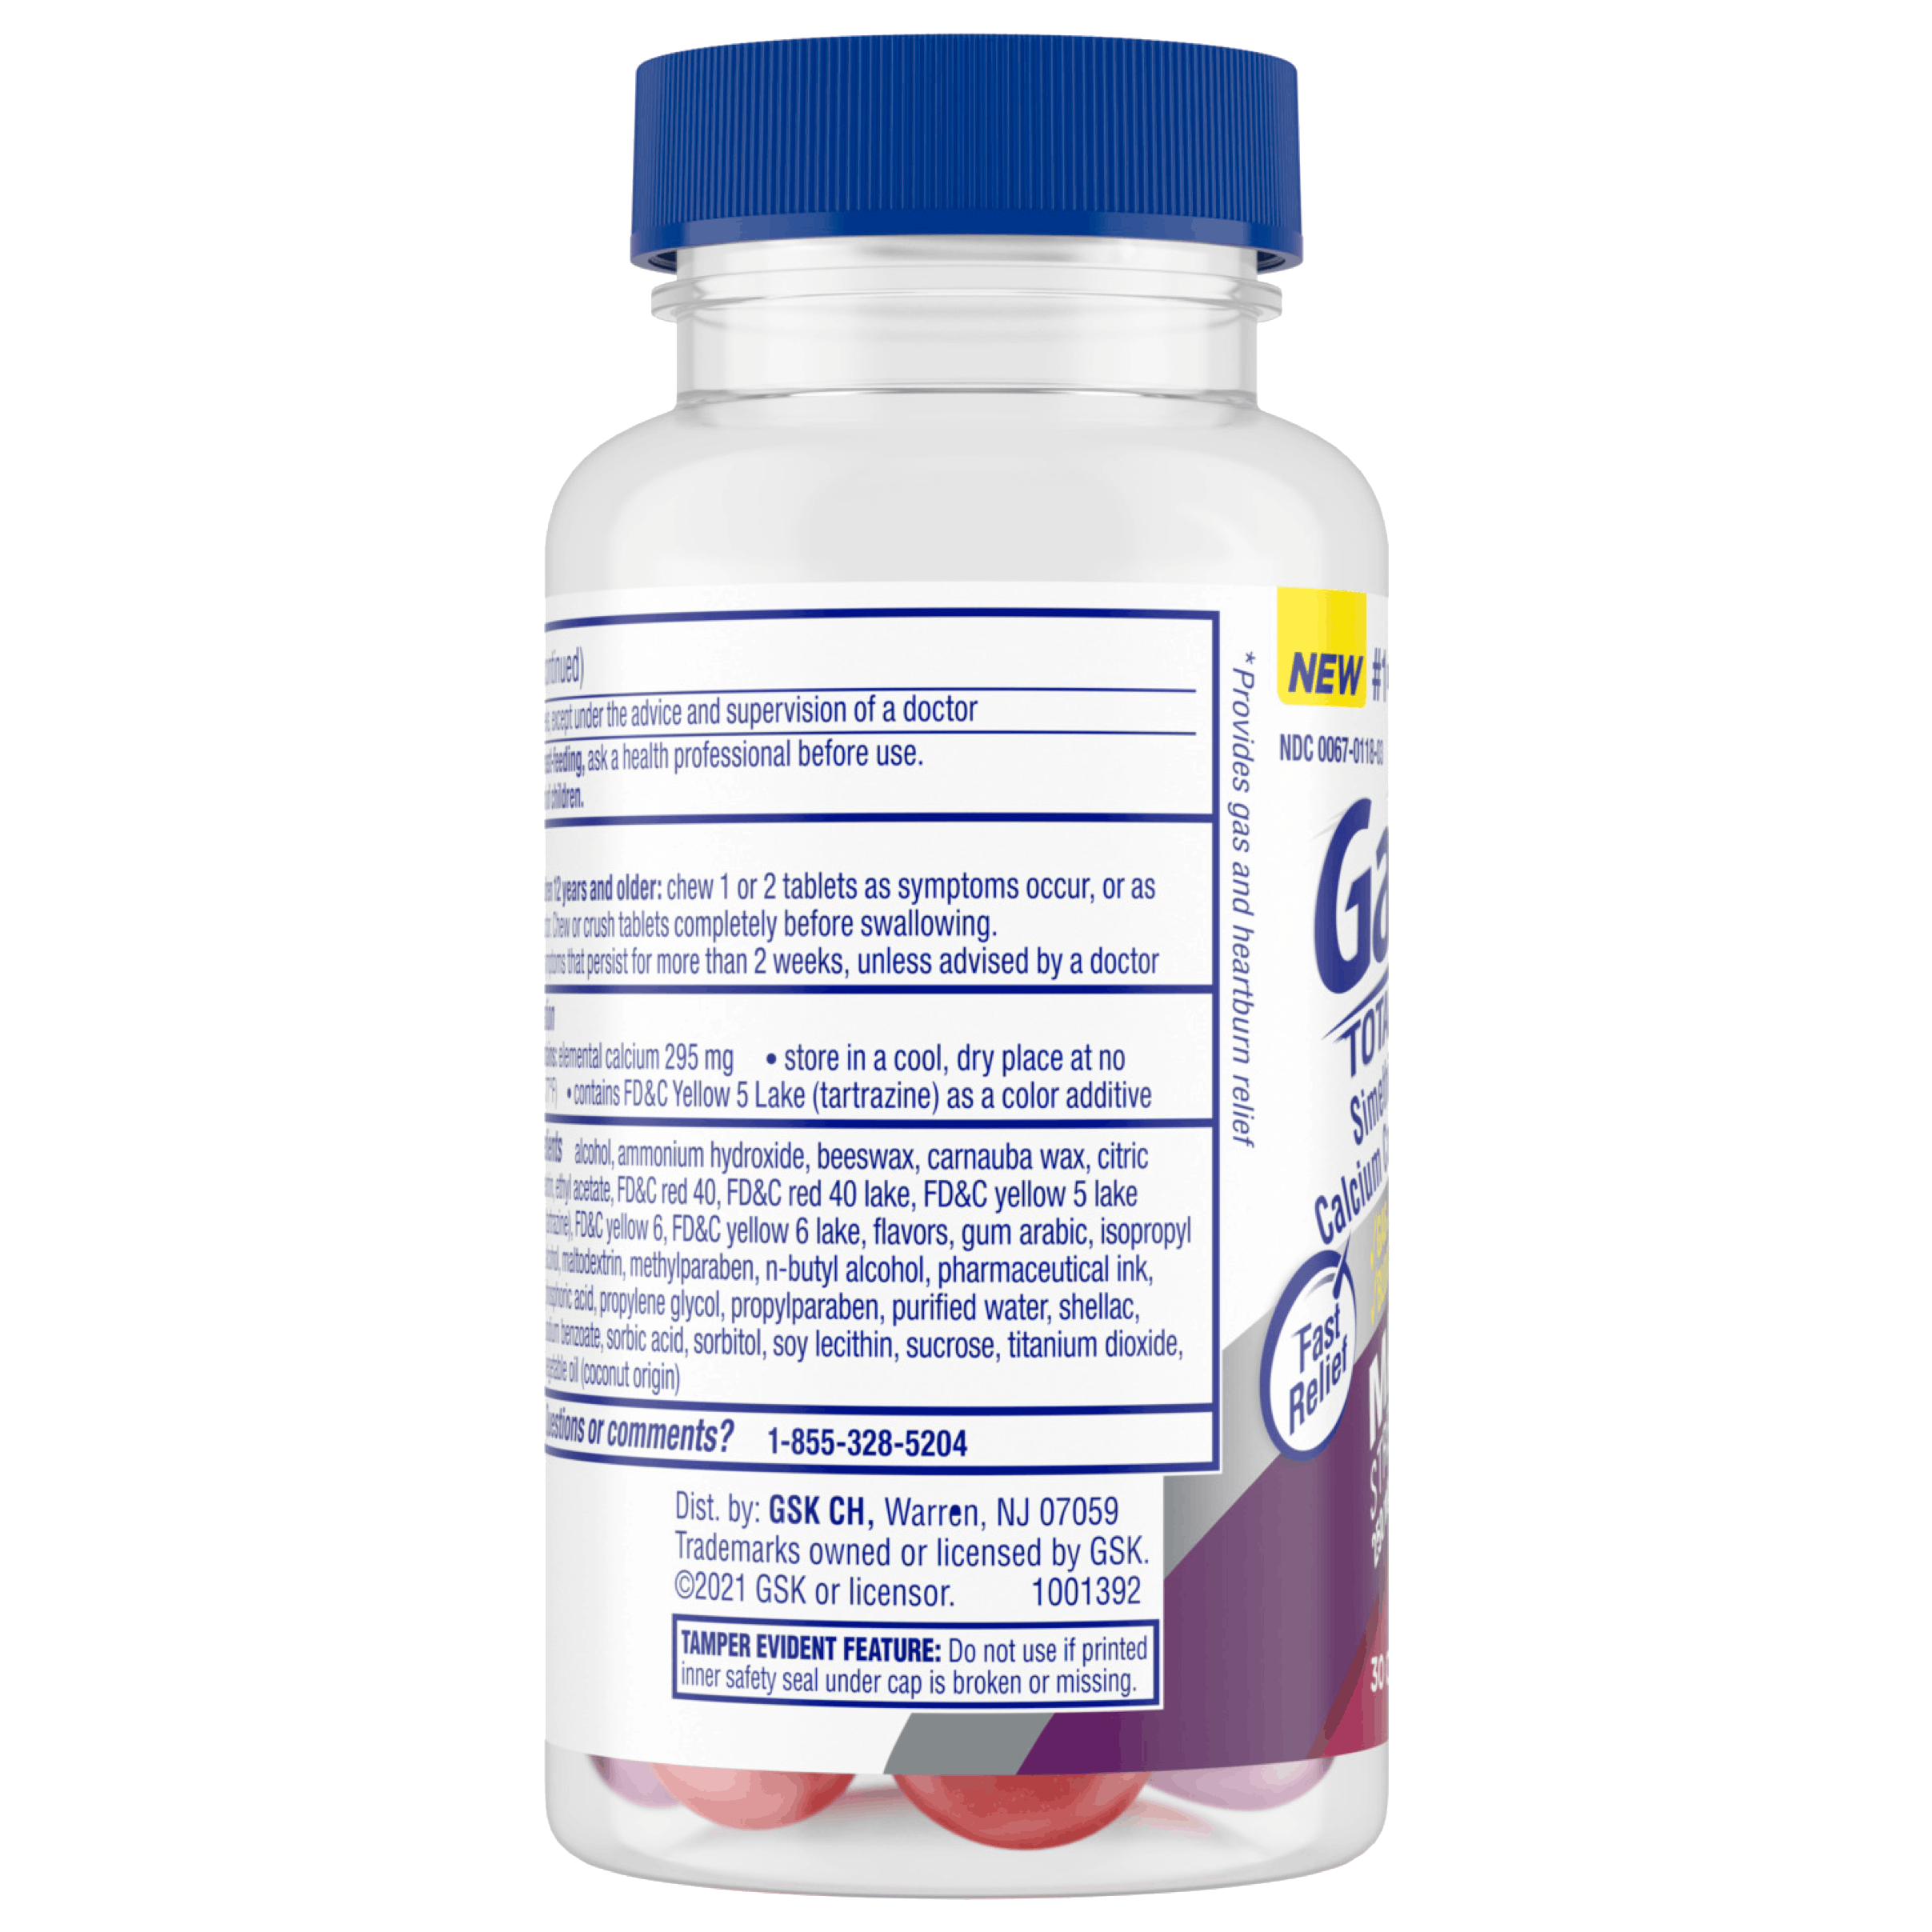 Gas-X Extra Strength Chewables